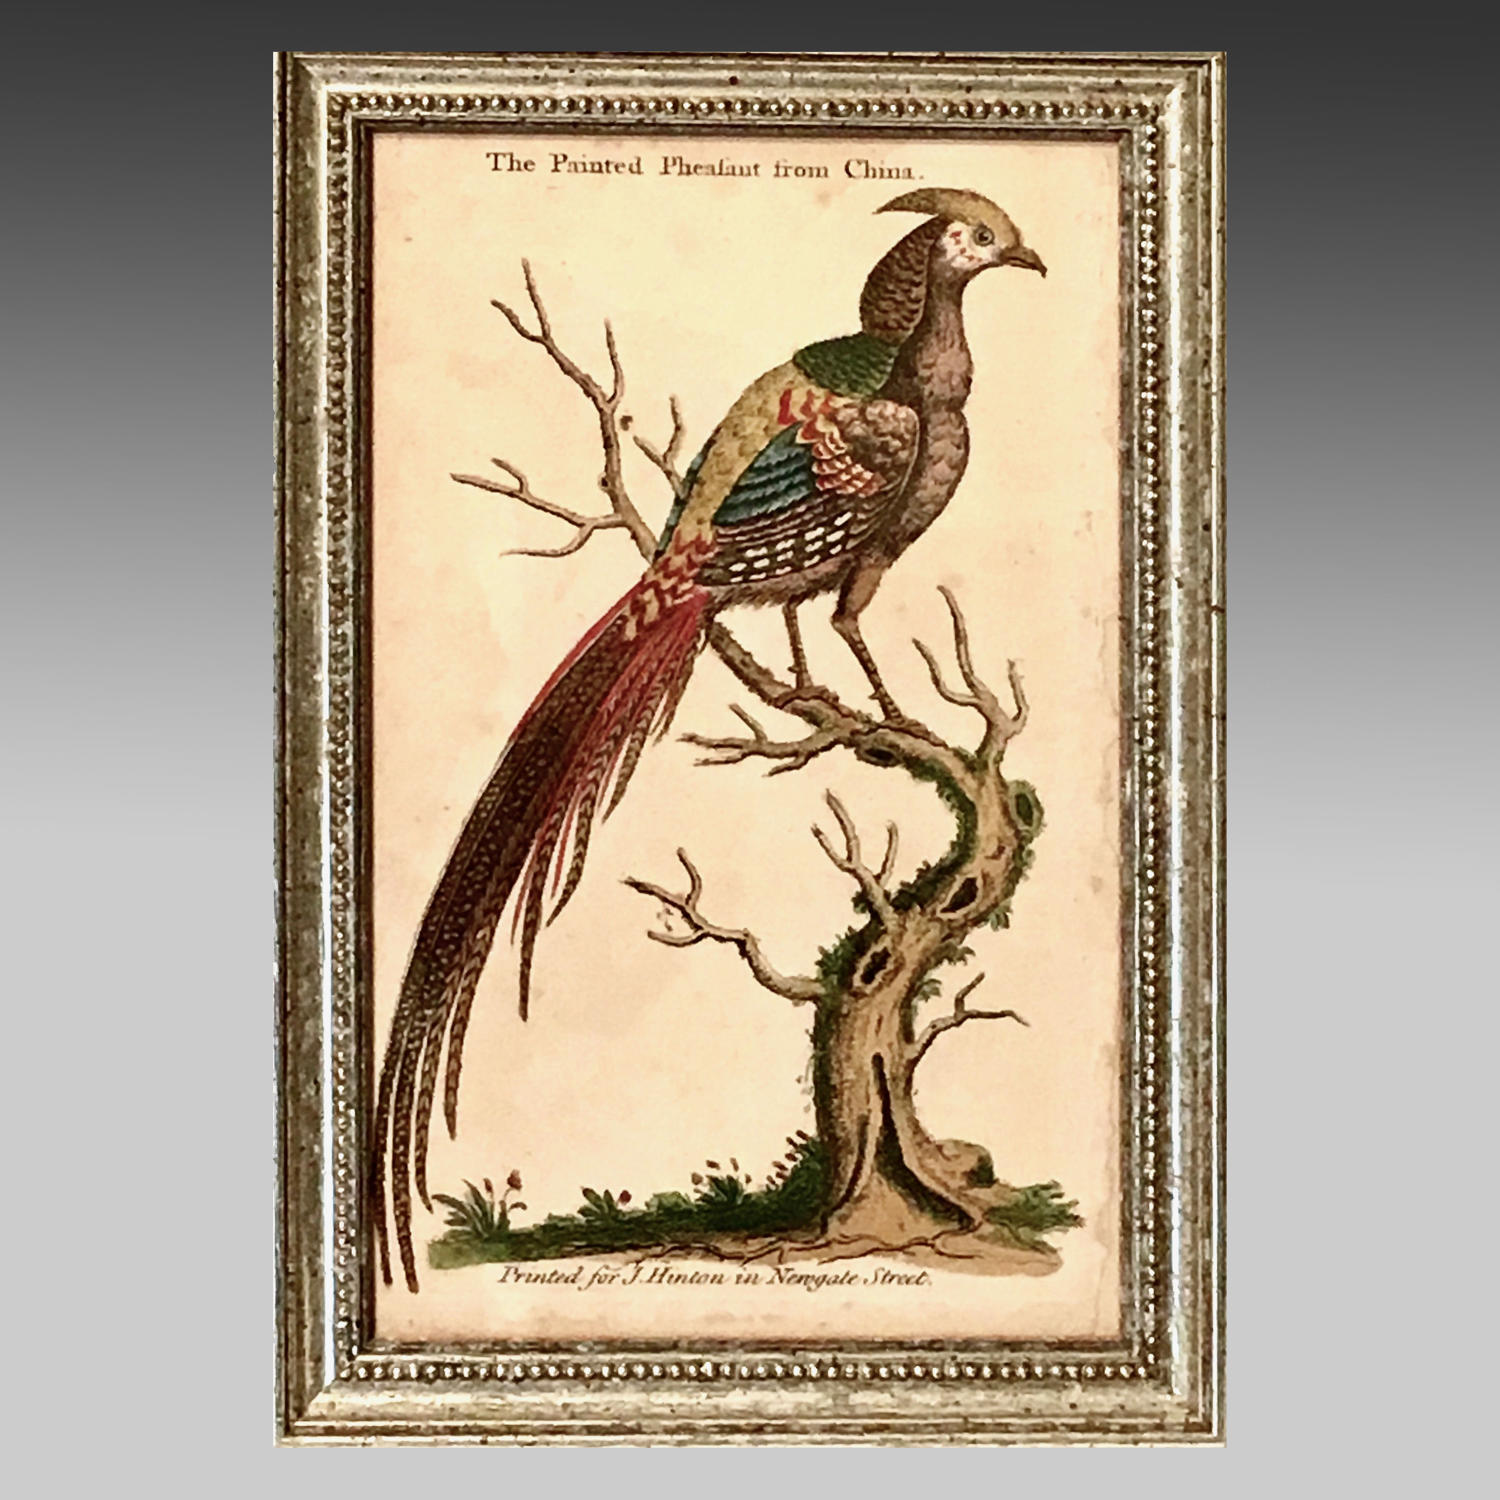 18th century engraving 'The Painted Pheasant from China'